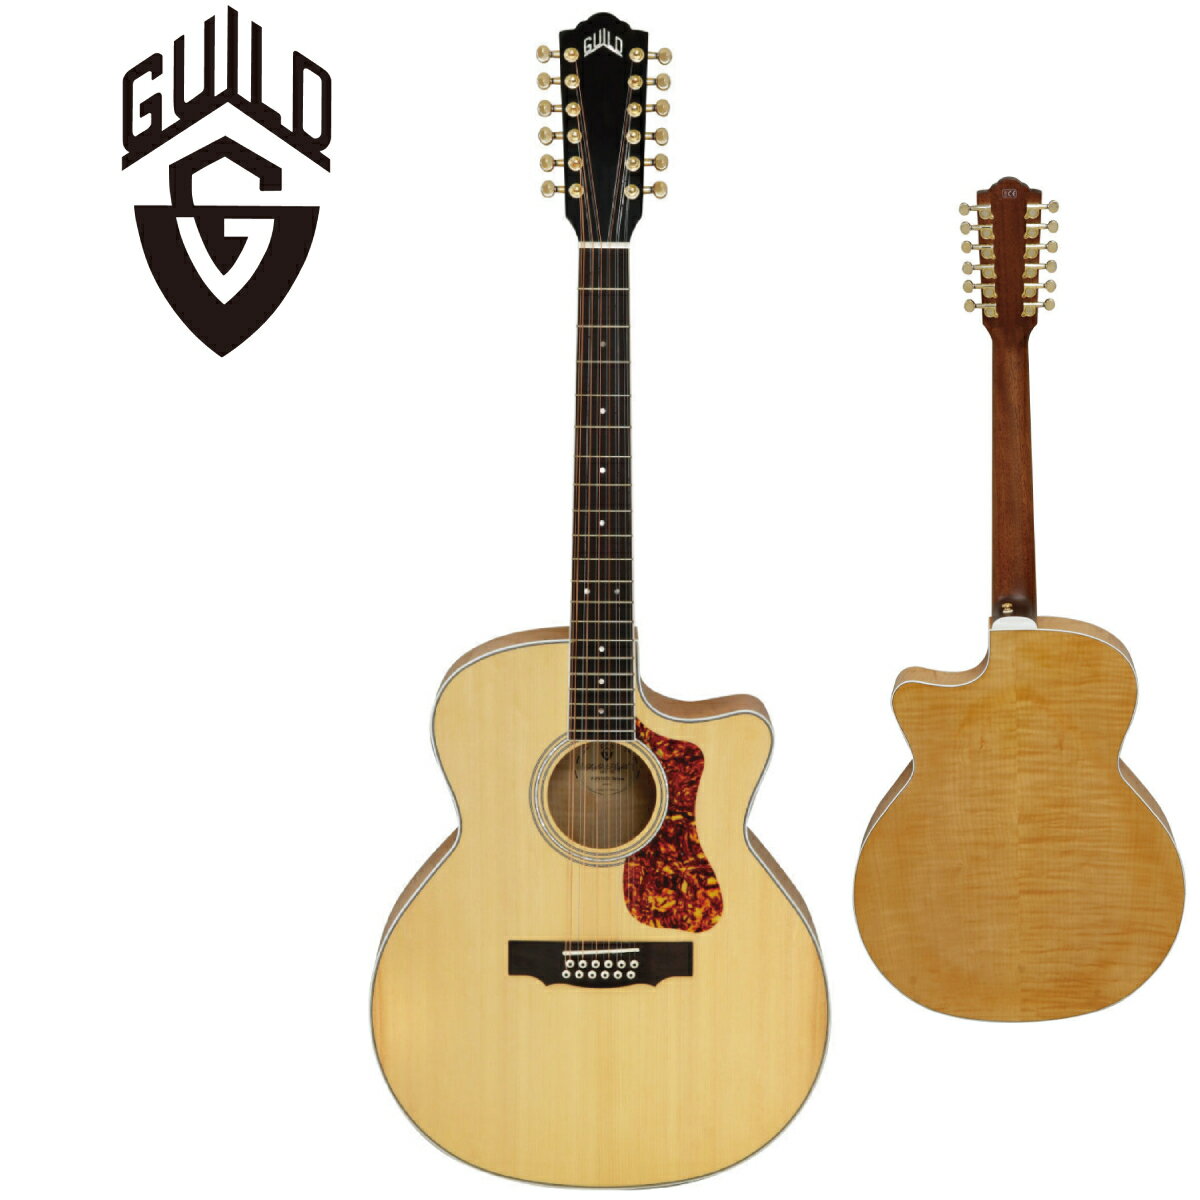 GUILD F-2512CE DELUXE MAPLE -BLD- 新品 [ギルド][Blonde,ブロンド][Electric Acoustic Guitar,アコースティックギター,エレアコ][F2512CE][12strings,12弦]